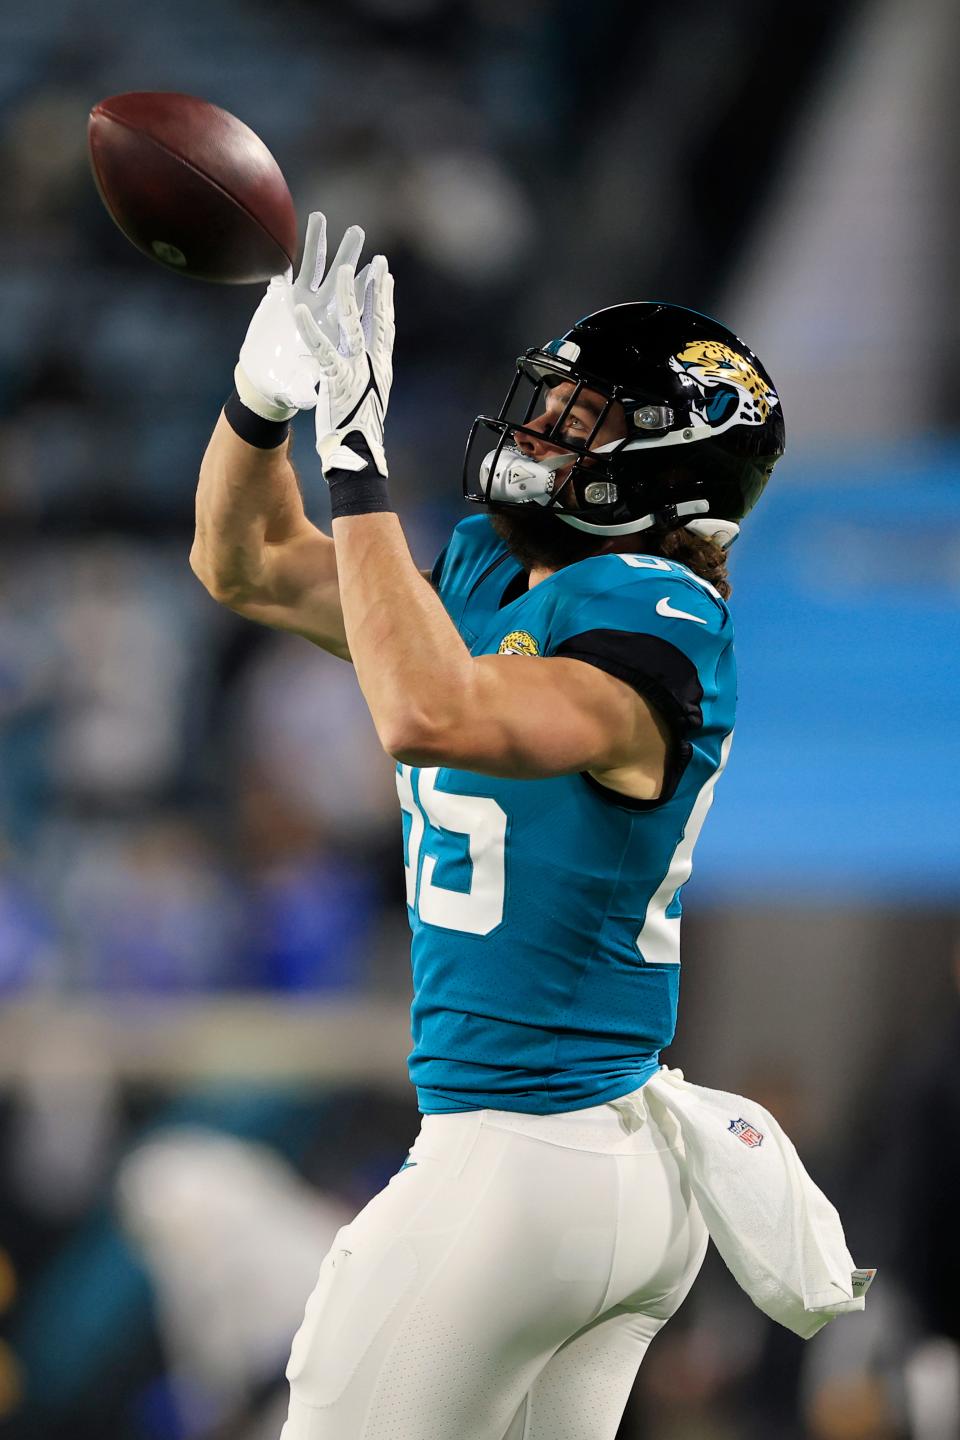 Jacksonville Jaguars tight end Dan Arnold (85) hauls in a pass before an NFL first round playoff football matchup between the Jacksonville Jaguars and the Los Angeles Chargers Saturday, Jan. 14, 2023 at TIAA Bank Field in Jacksonville, Fla. The Jacksonville Jaguars edged the Los Angeles Chargers on a field goal 31-30. [Corey Perrine/Florida Times-Union]